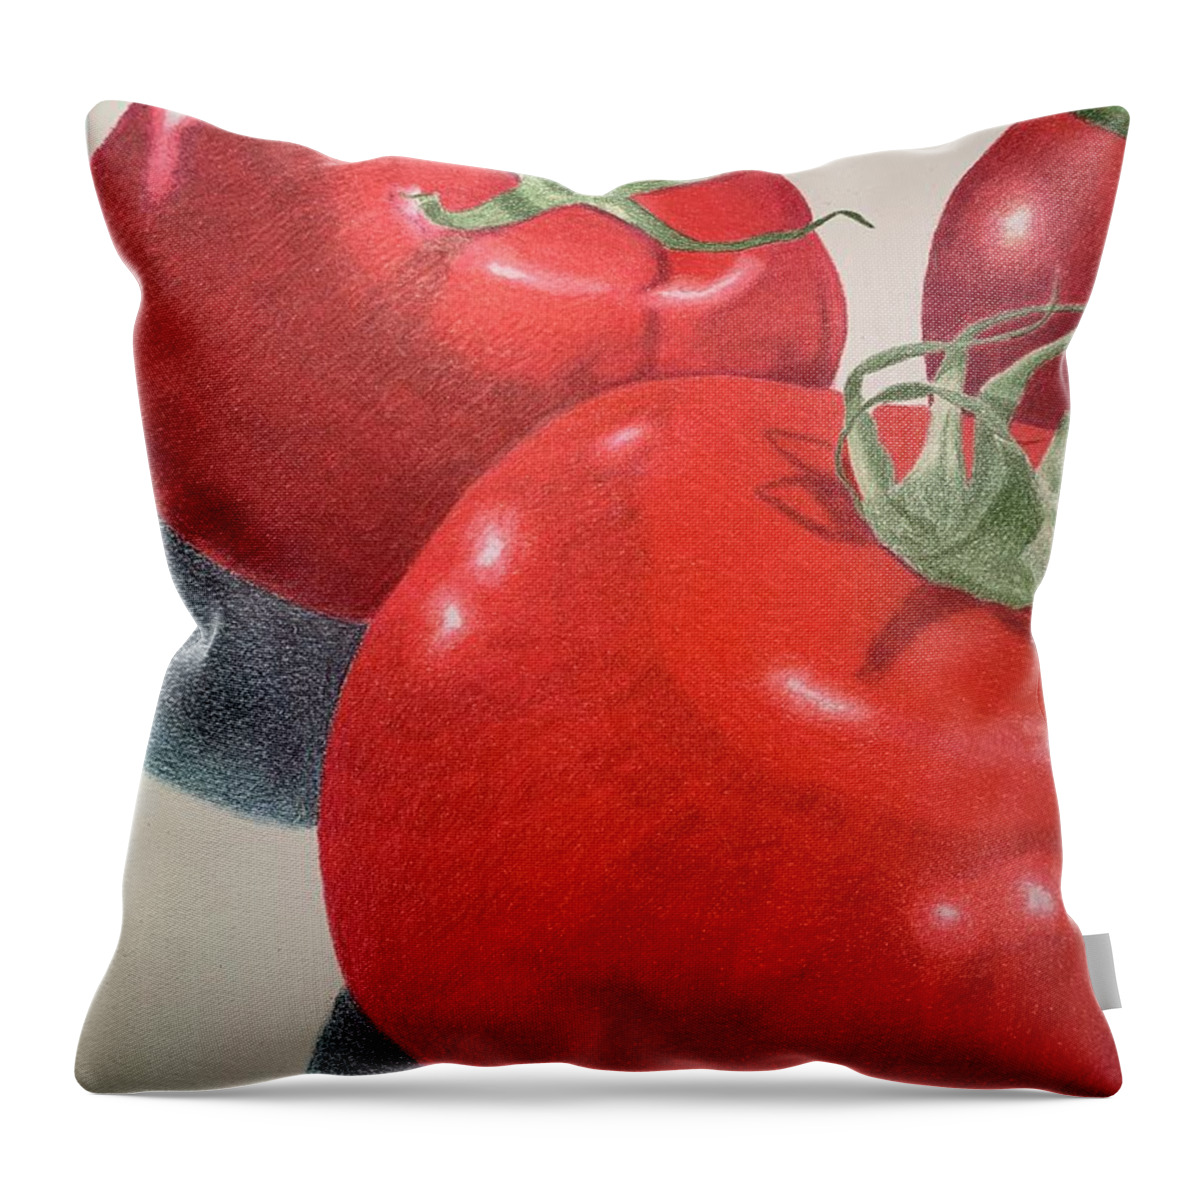 Tomatoes Throw Pillow featuring the drawing Maters by Colette Lee